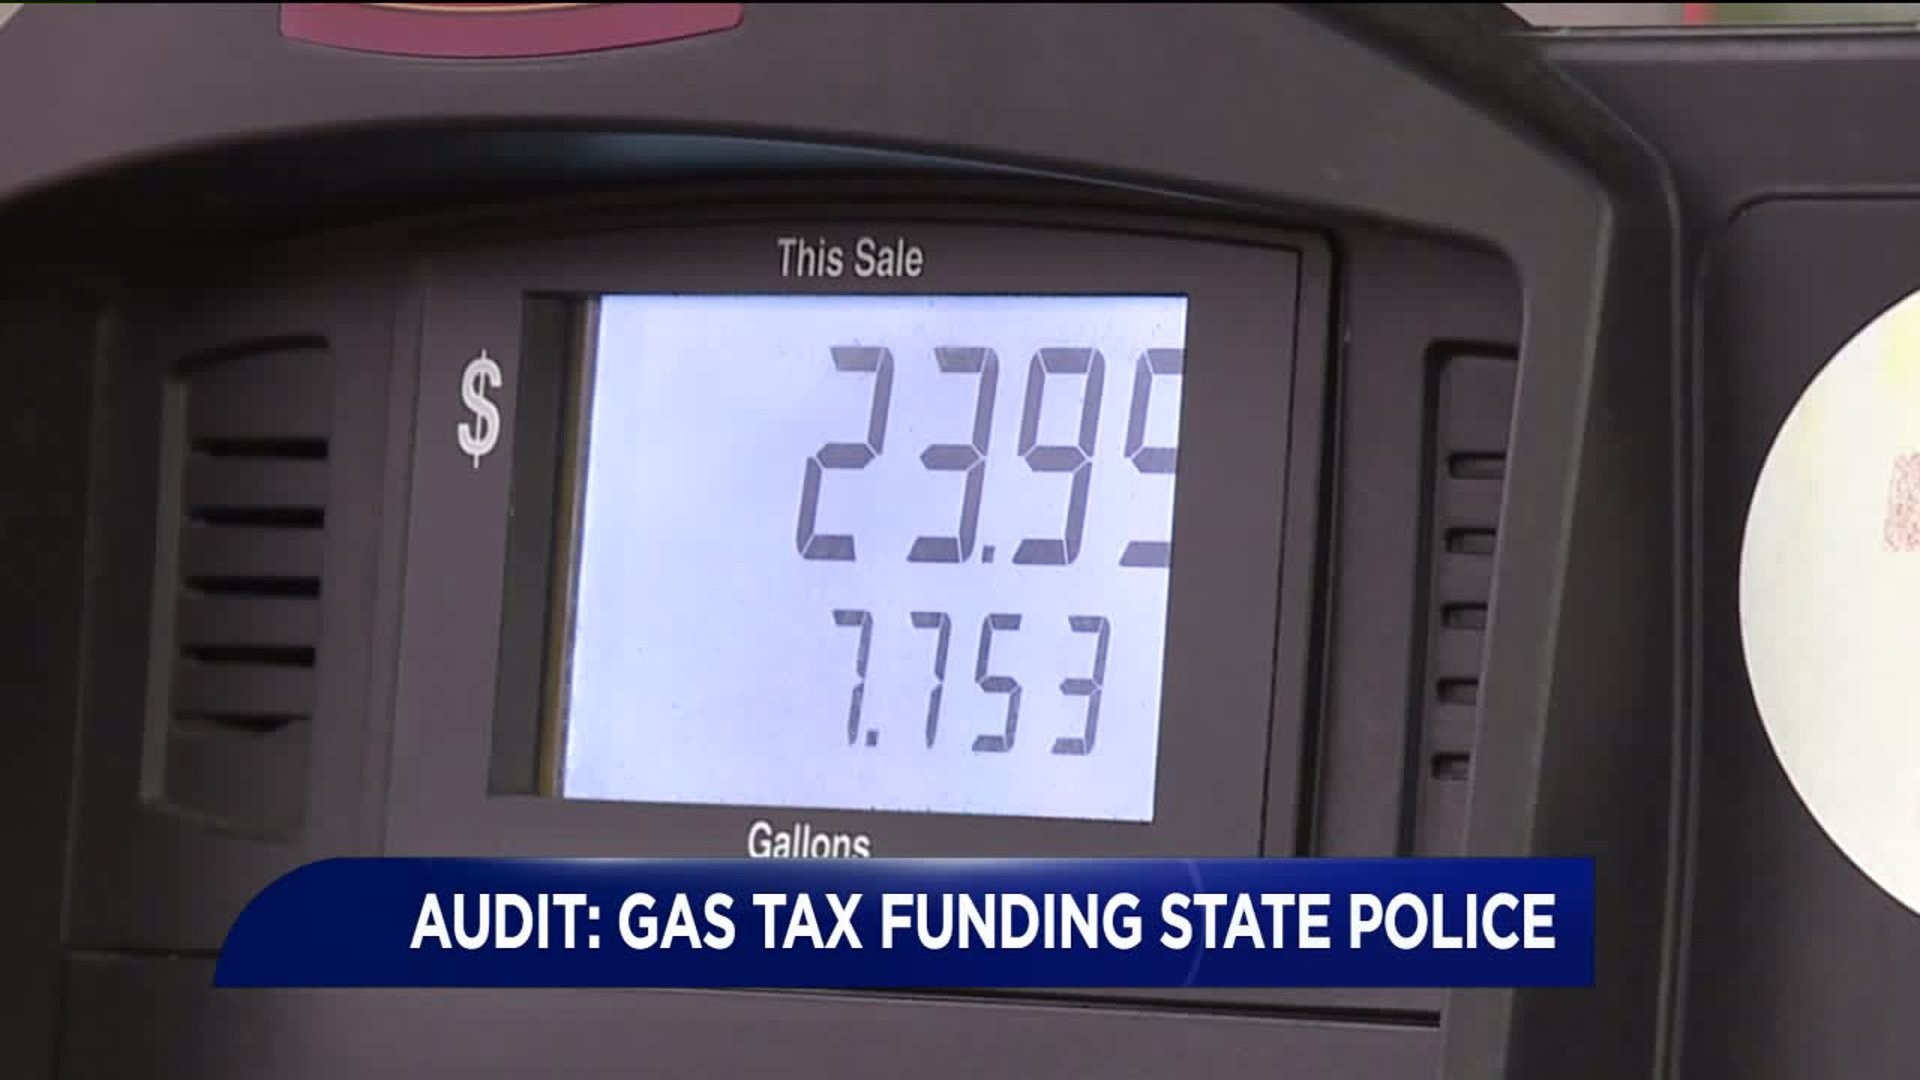 Taxpayers React to Gas Tax Money Meant for Road Repair Used to Fund State Police